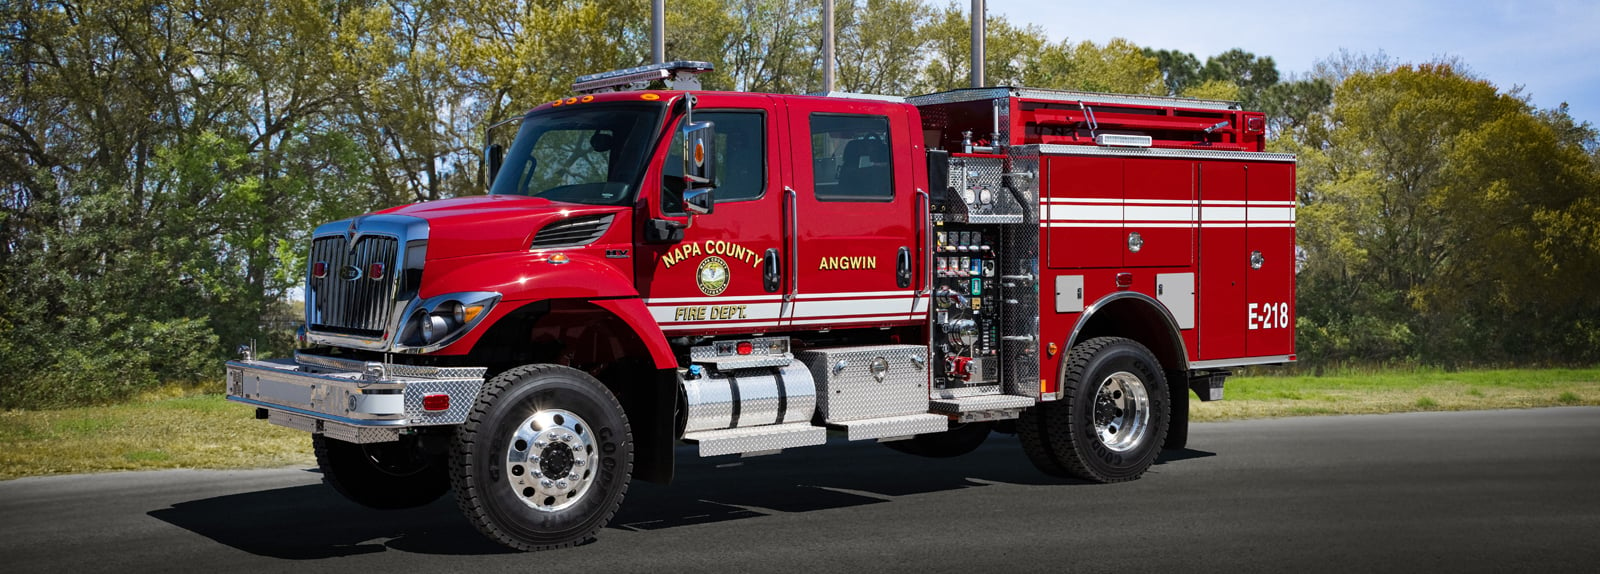 What Are the Different Types of Fire Trucks and Fire Engines